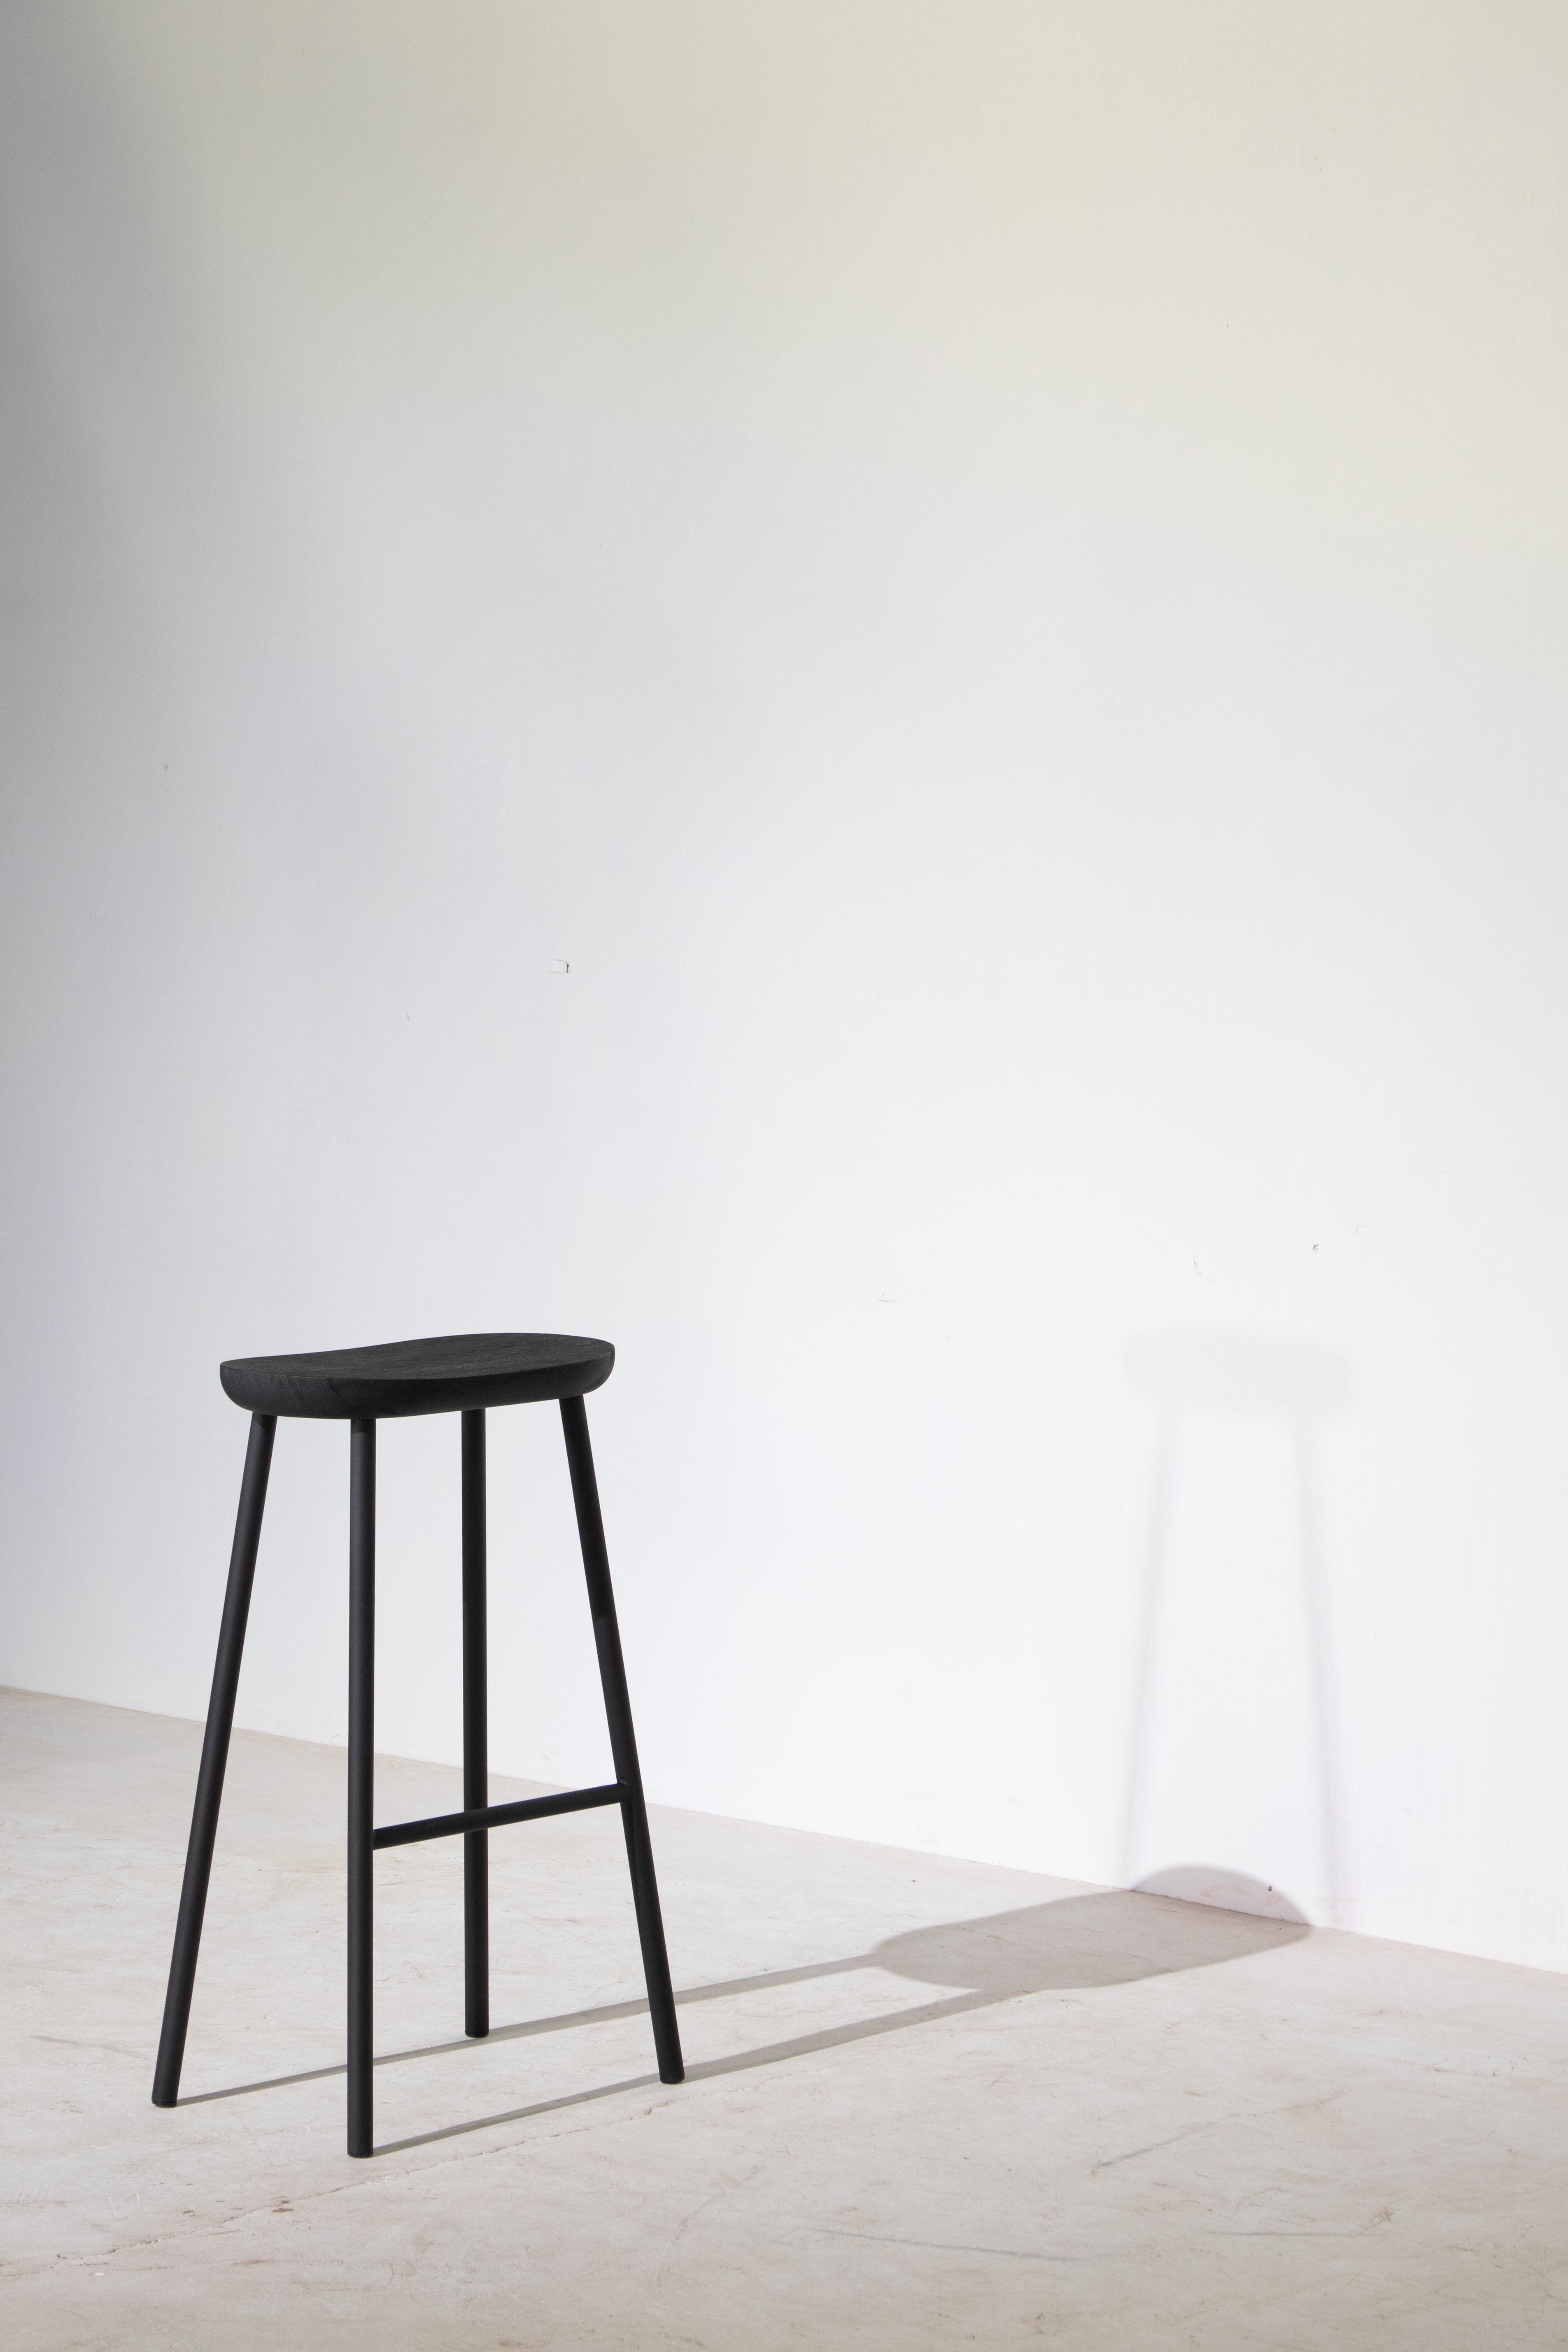 Buacheen, Rough Black Acacia Wood Bar Stool with Black Powder Coated Iron Legs In New Condition For Sale In Chiangmai, TH